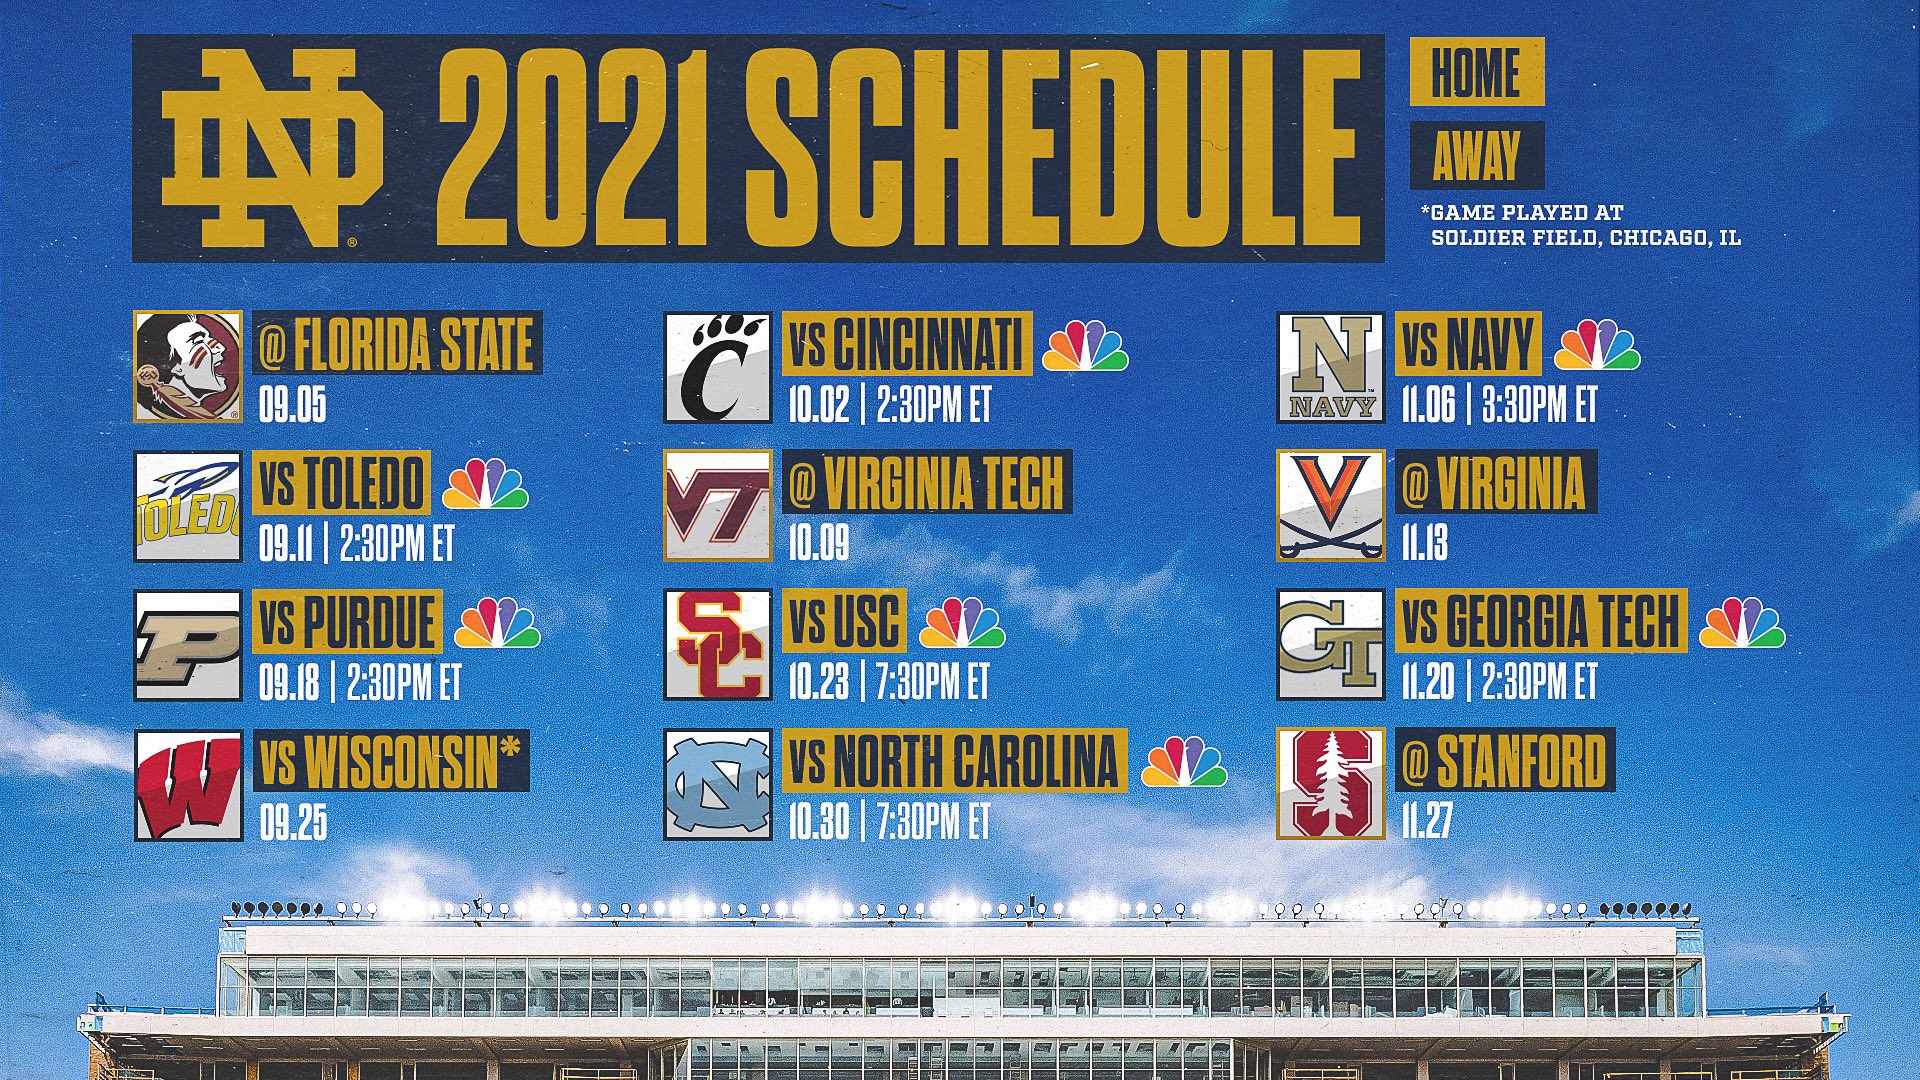 Nd Football 2022 Schedule Notre Dame Football On Twitter: "Here's The 2021 Schedule. ☘️ Which Game  Are You The Most Excited For? 🔗 Https://T.co/3Qihuoxx2G #Goirish  Https://T.co/Zgvwftlfic" / Twitter